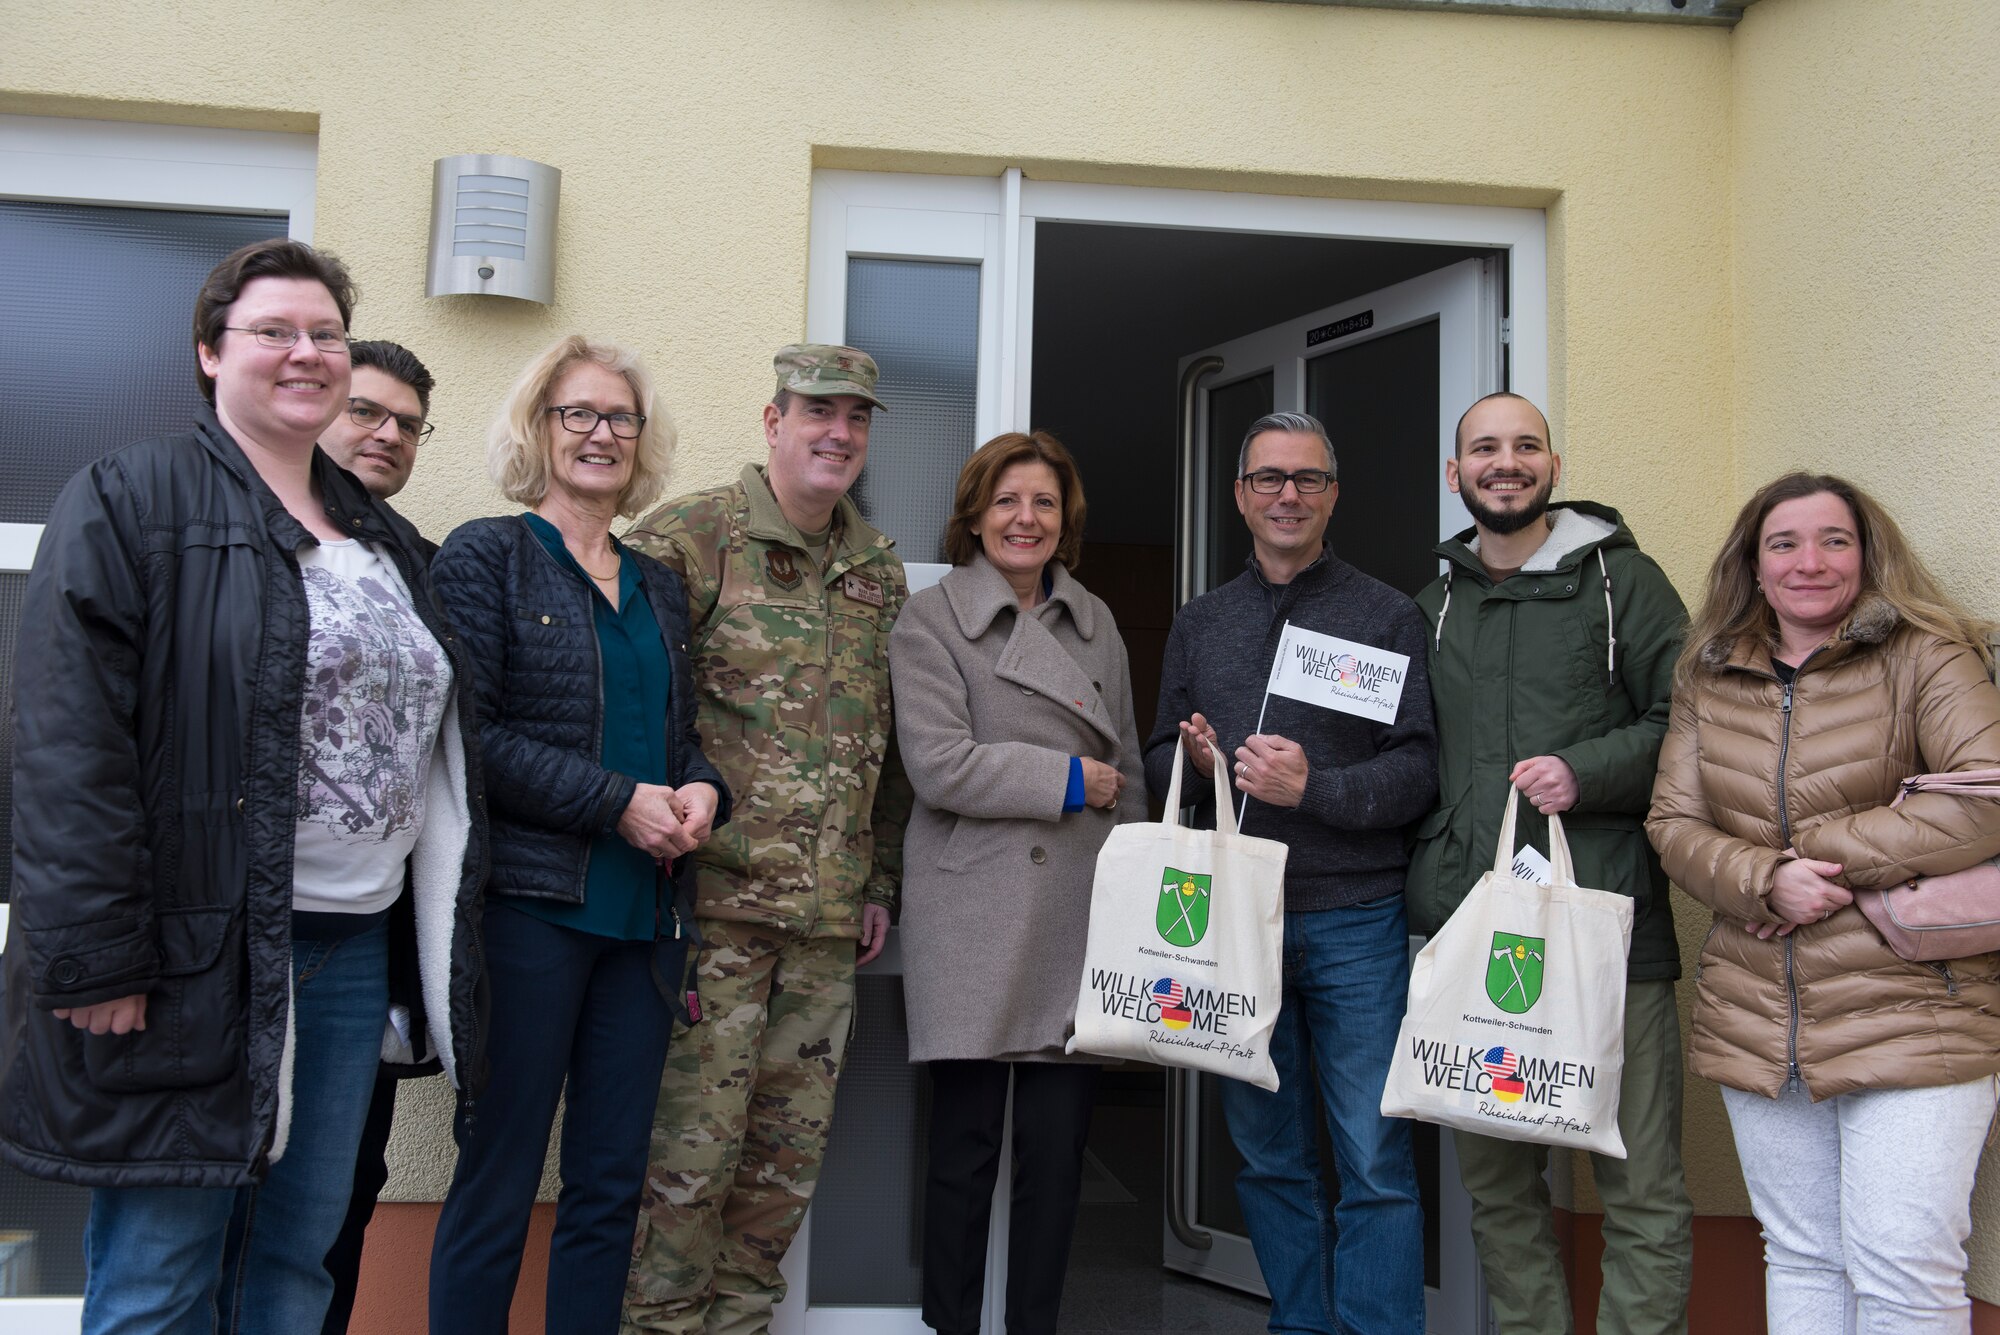 Ramstein Air Base and Rheinland-Pfalz leadership pose for a photo with community members